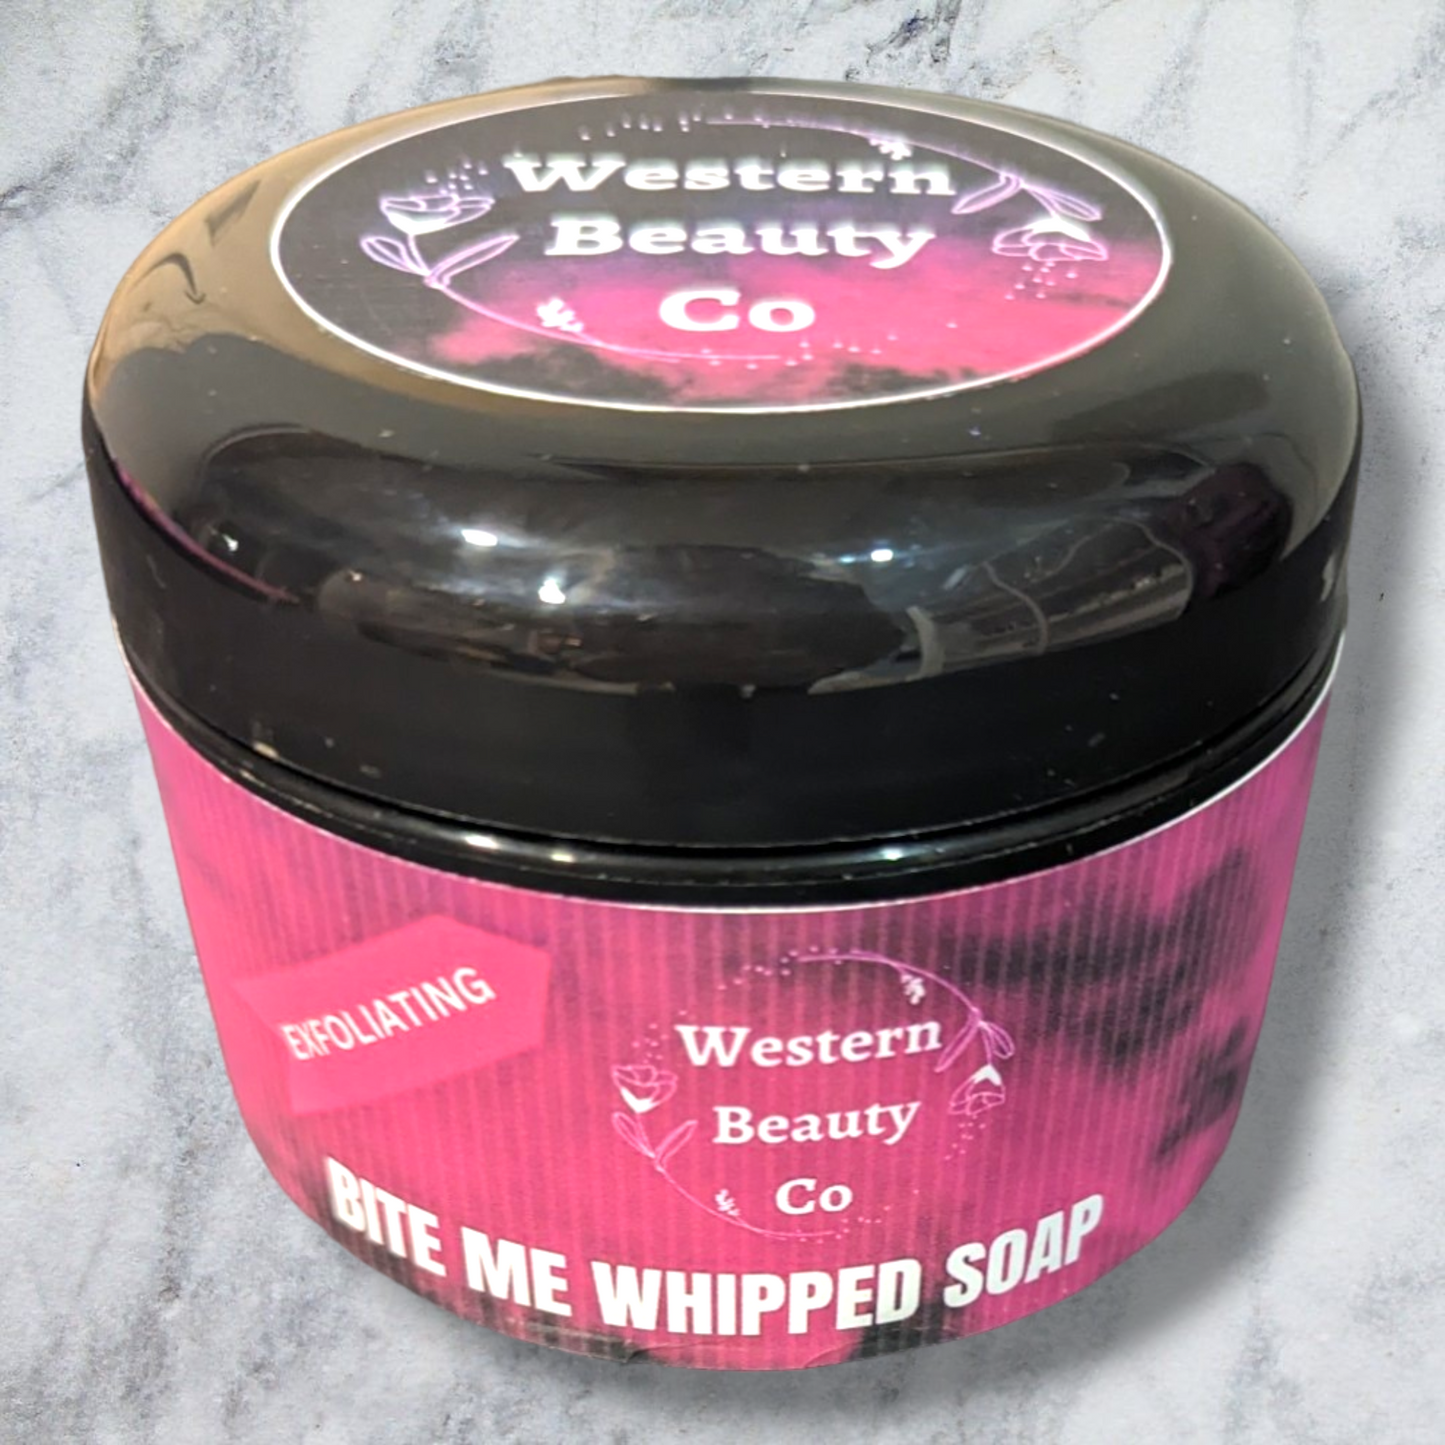 Bite Me Whipped Soap